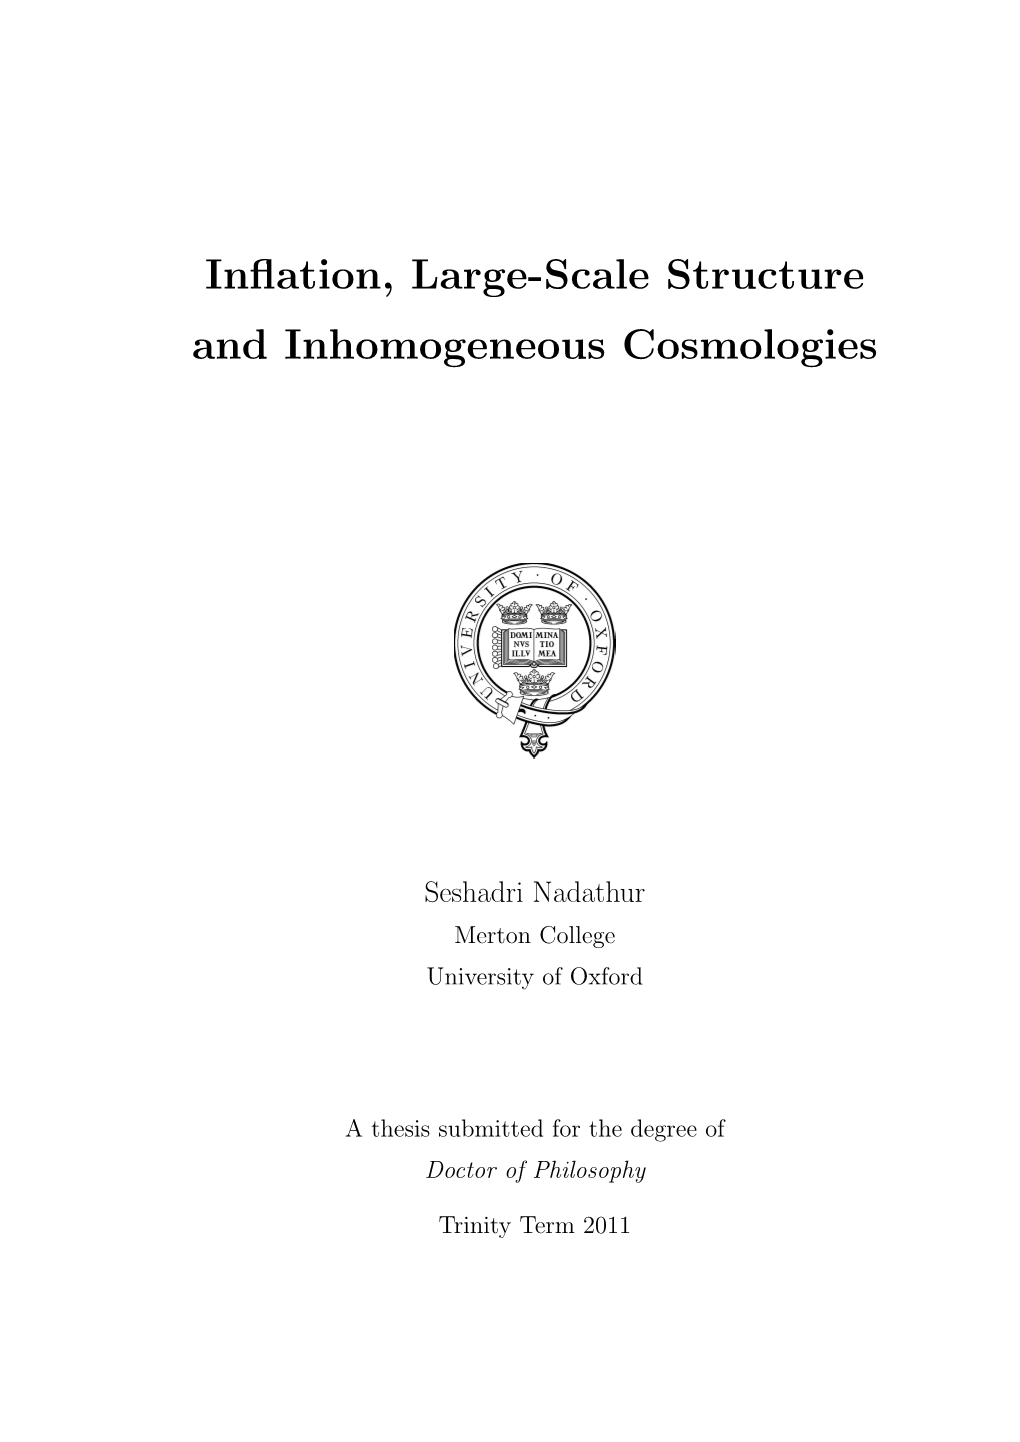 Inflation, Large-Scale Structure and Inhomogeneous Cosmologies